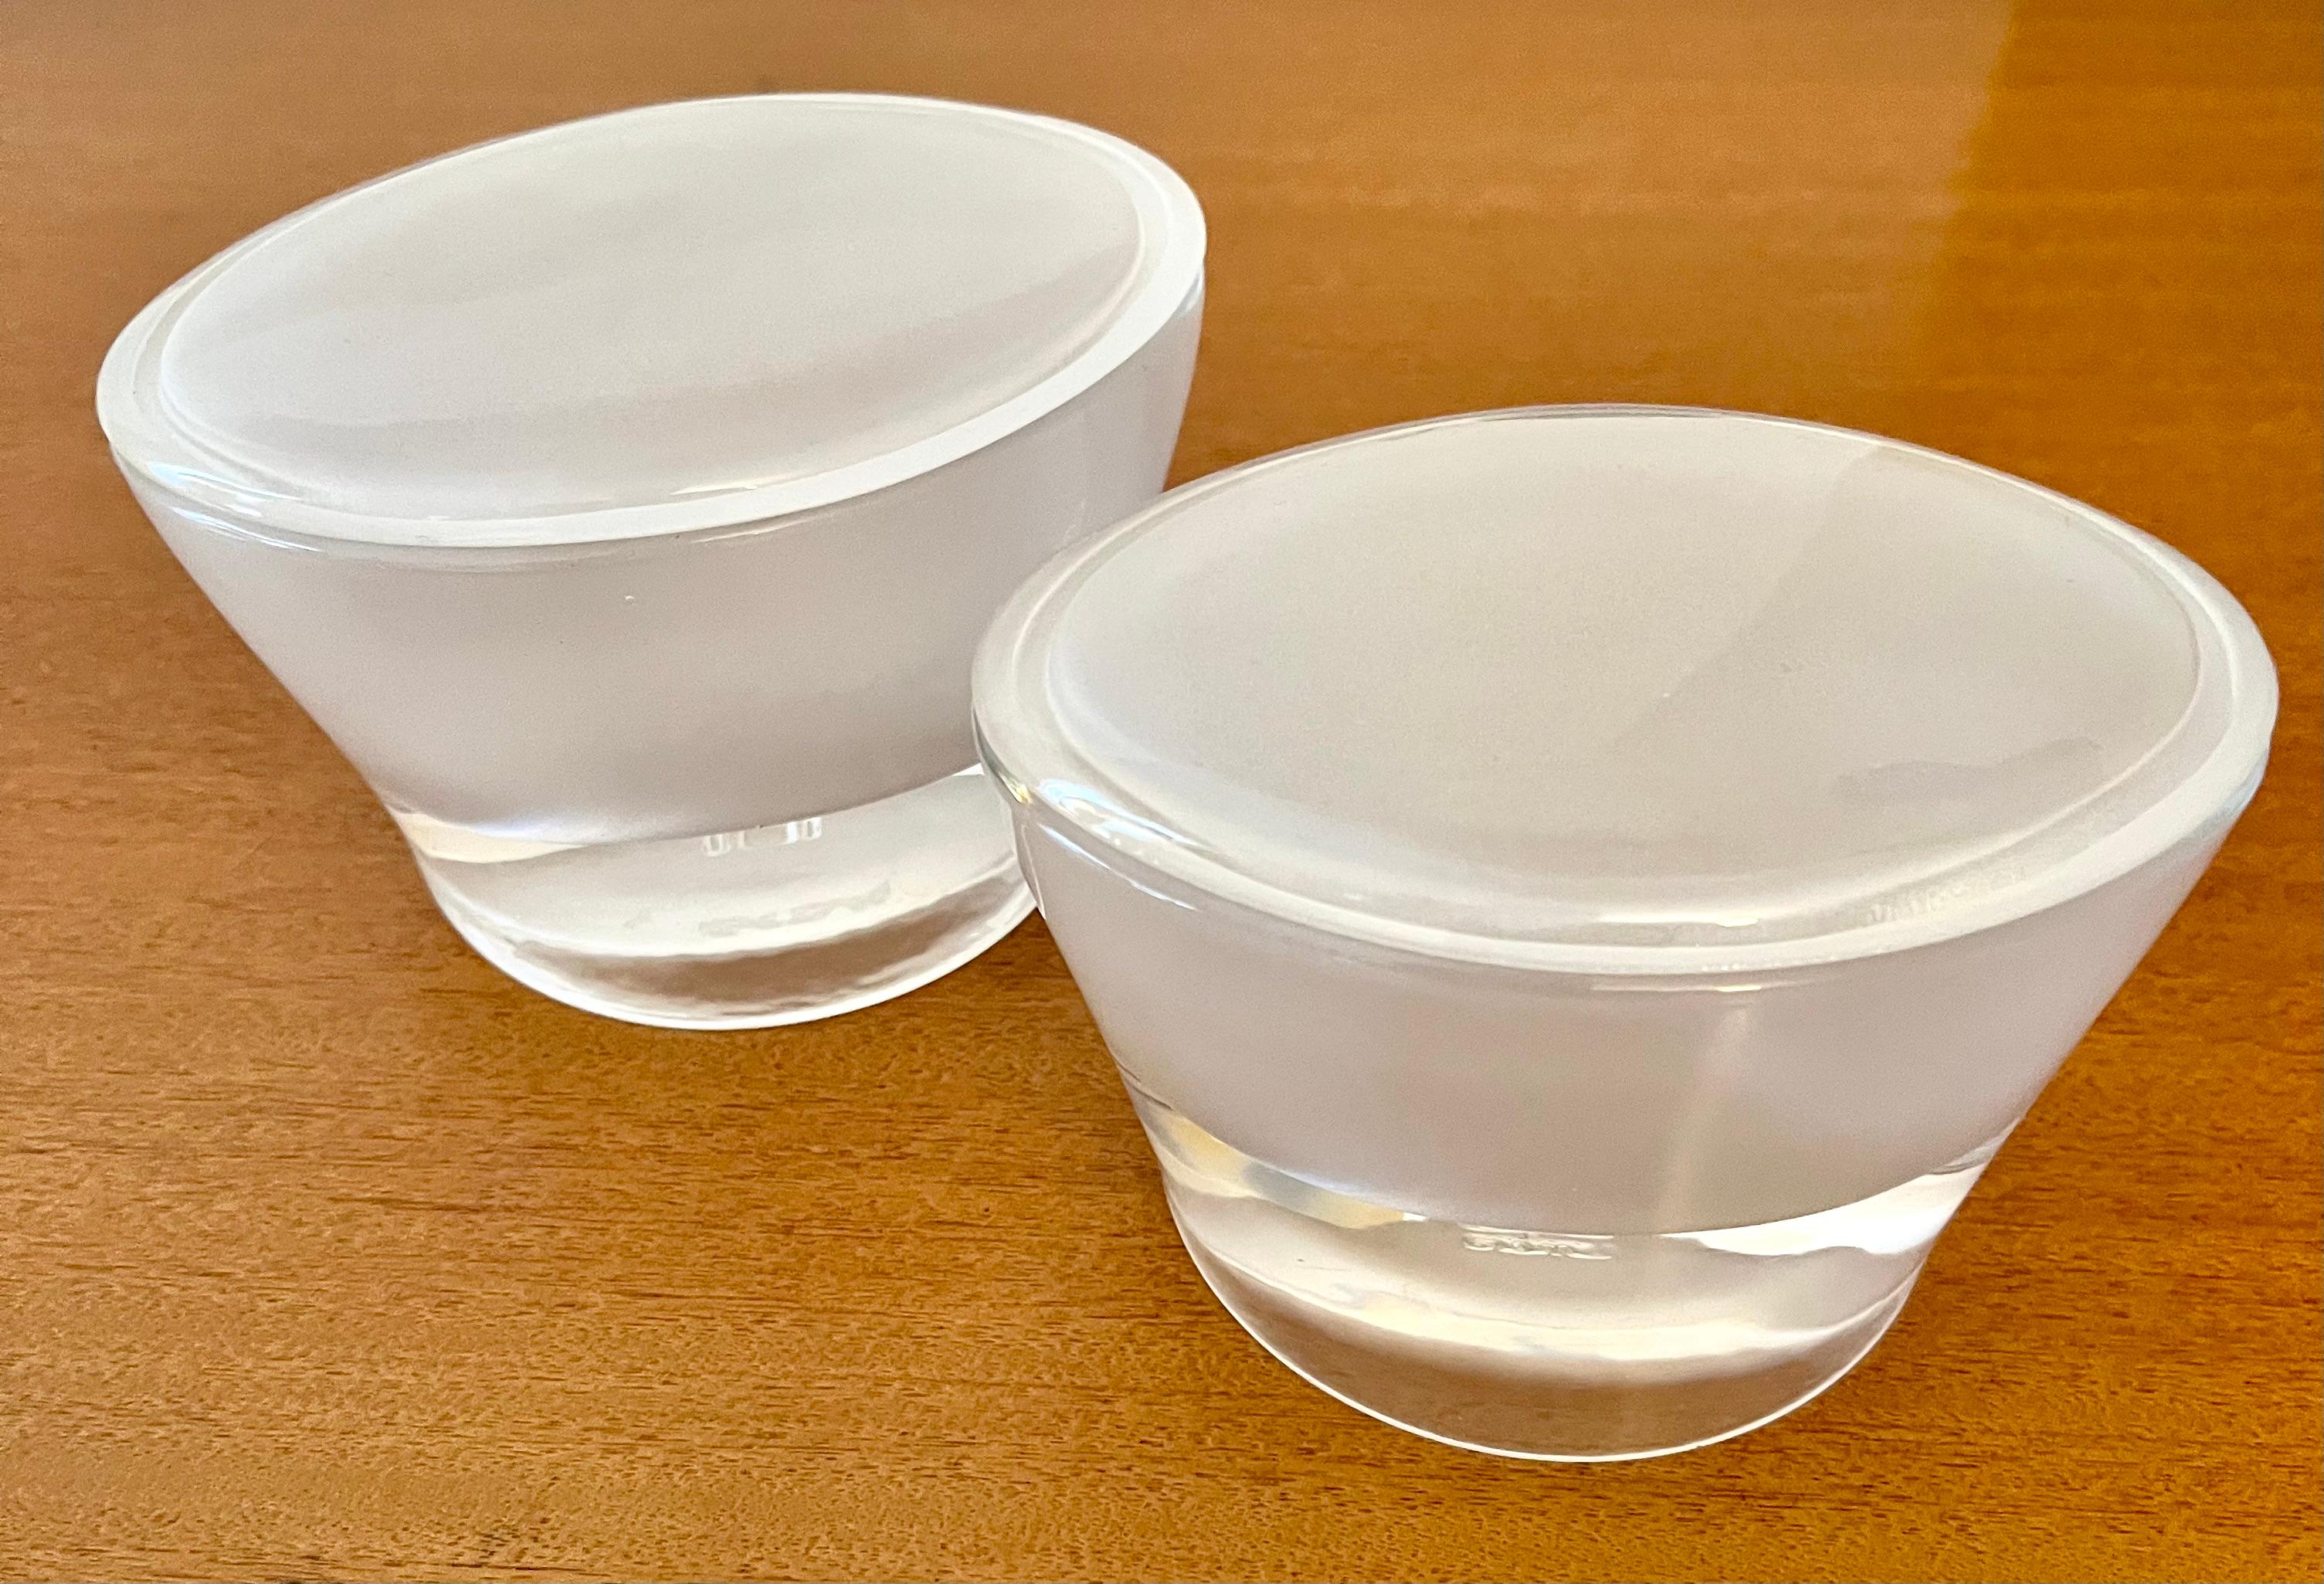 Pair of oval lidded frosted glass boxes.  The pair are unique and very versatile, for use from the vanity to your work station or desk... holding rings on your bedside or candy on your cocktail table - 

A substantial pair with a great look and a